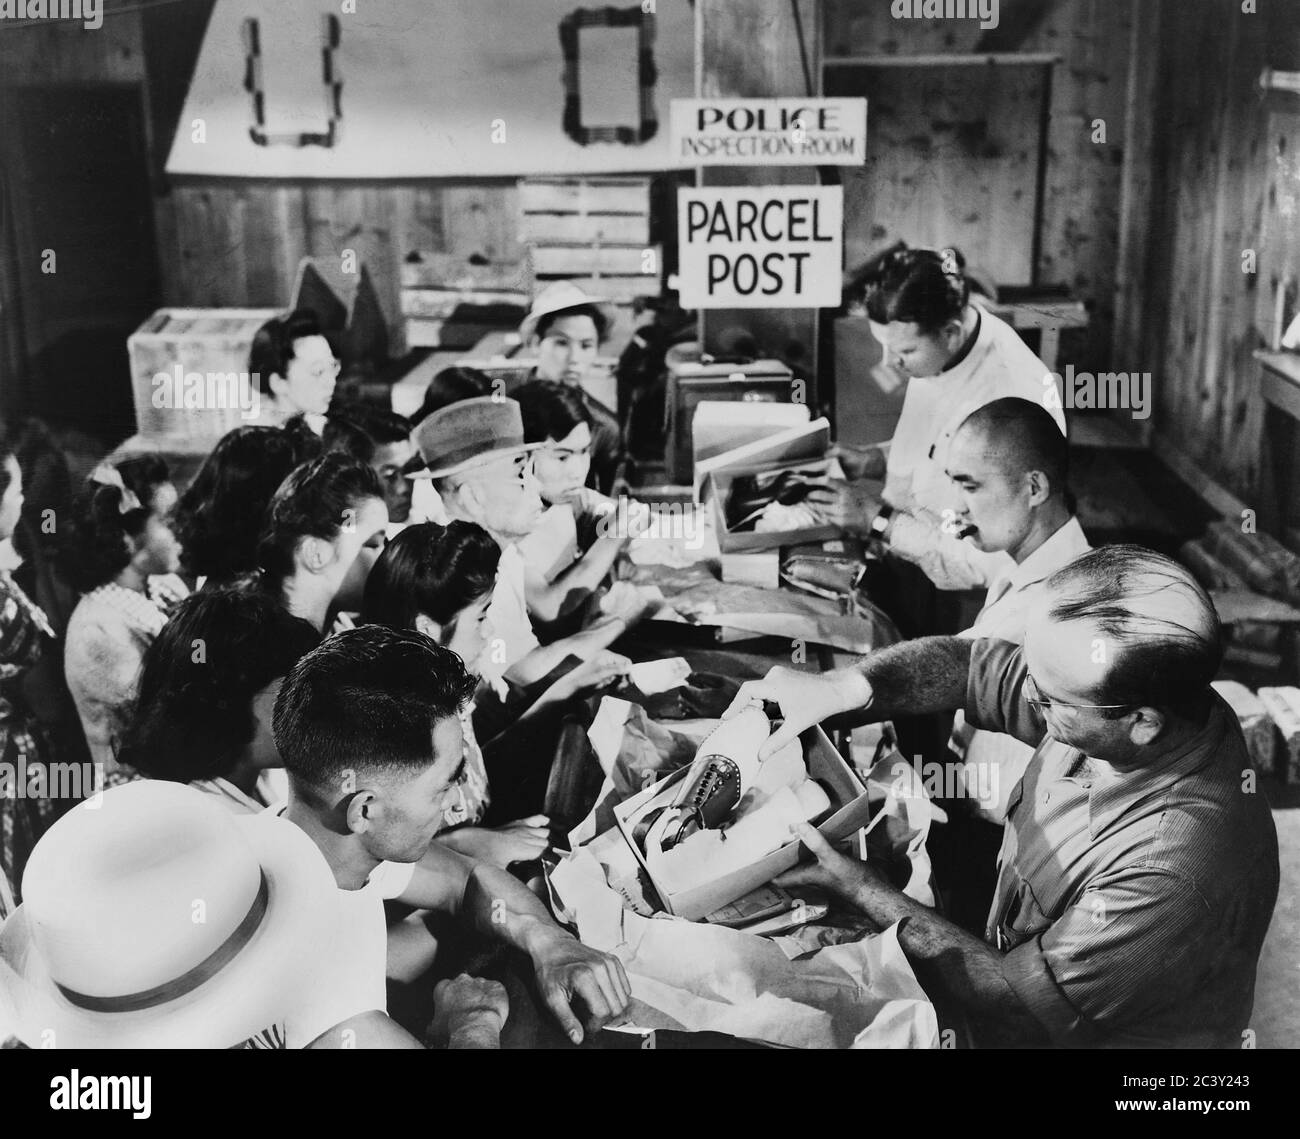 Japanese Americans gather in Police Inspection Room to receive Packages that are being inspected at Detention Facility, Stockton, California, USA, U.S. Army Signal Corps, 1942 Stock Photo